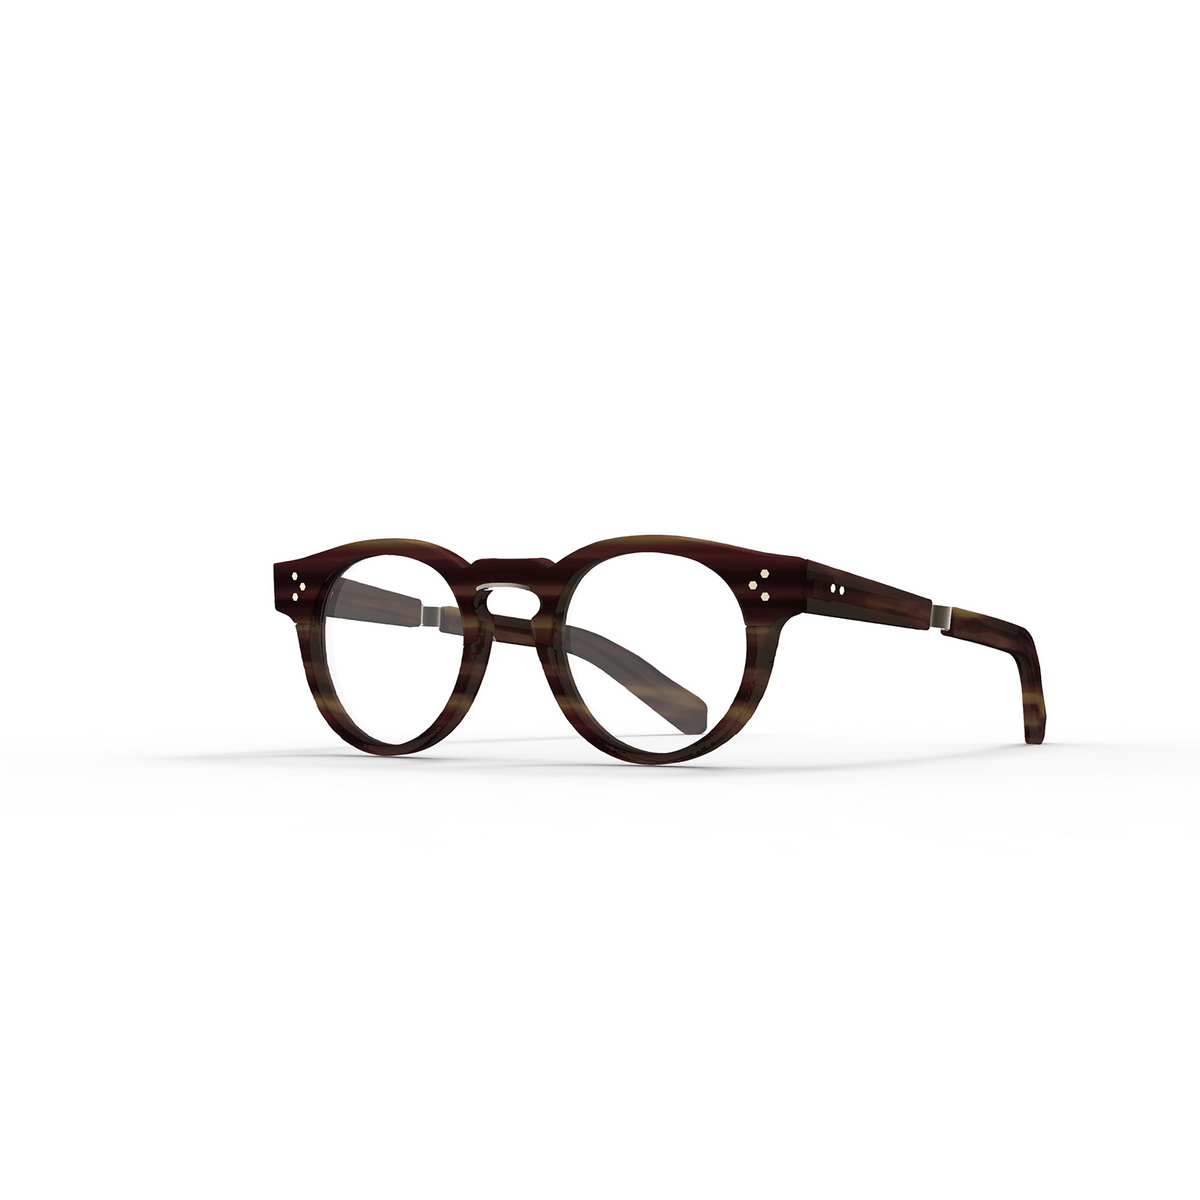 Mr. Leight® Round Eyeglasses: Kennedy C color Matte Driftwood-antique Gold Ii Mdrftwd-atgii - three-quarters view.